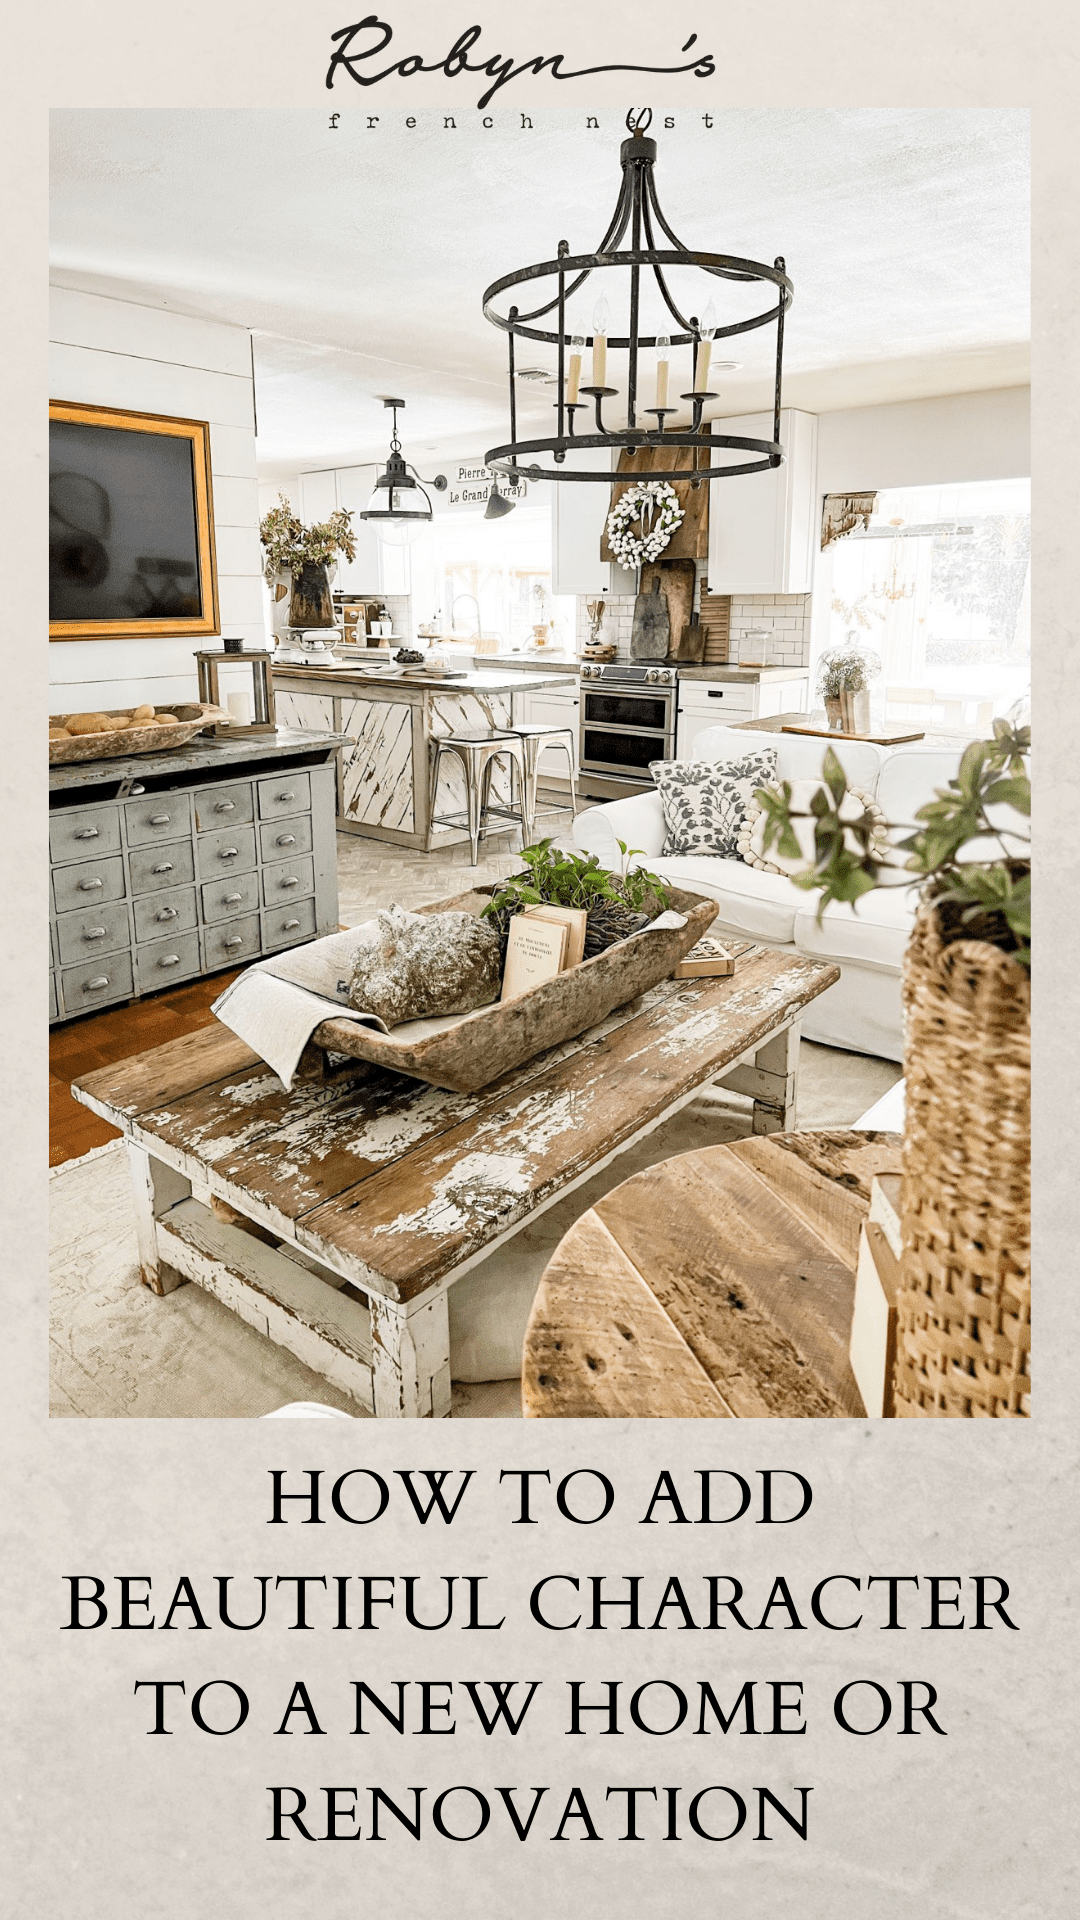 How to Add Beautiful Character to a New Home